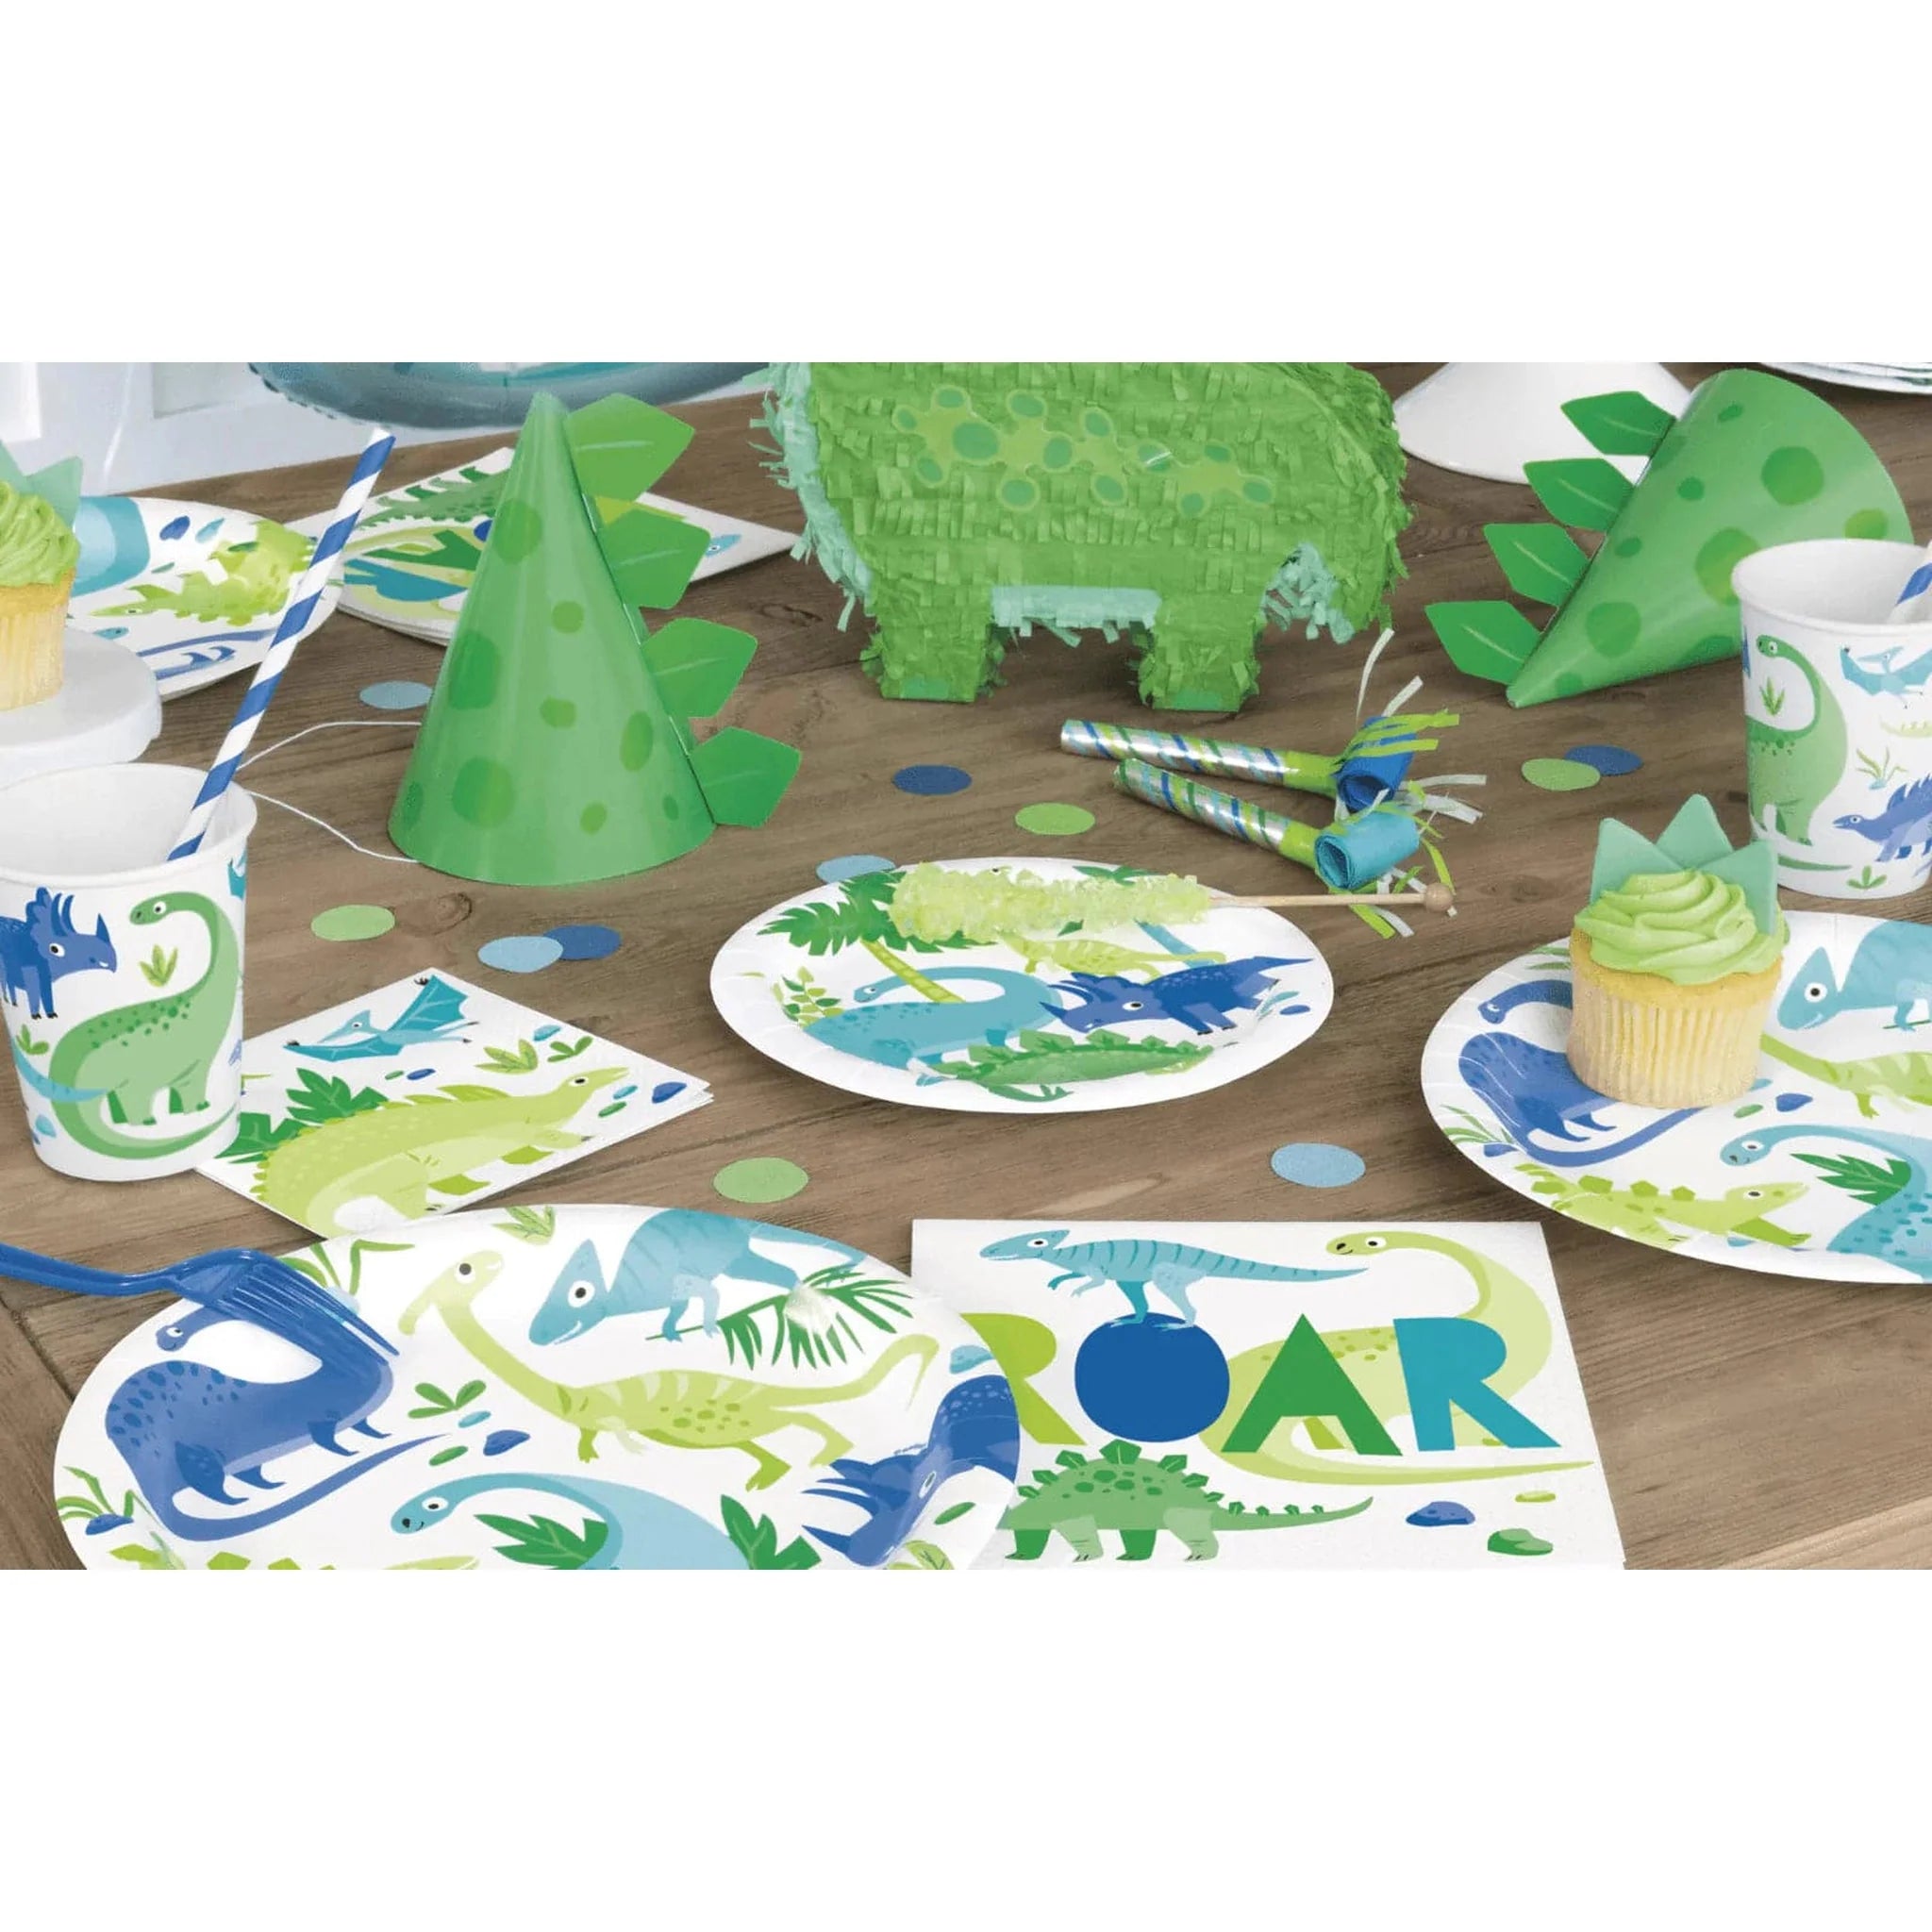 Dinosaur Party Game - Kids Party Craft